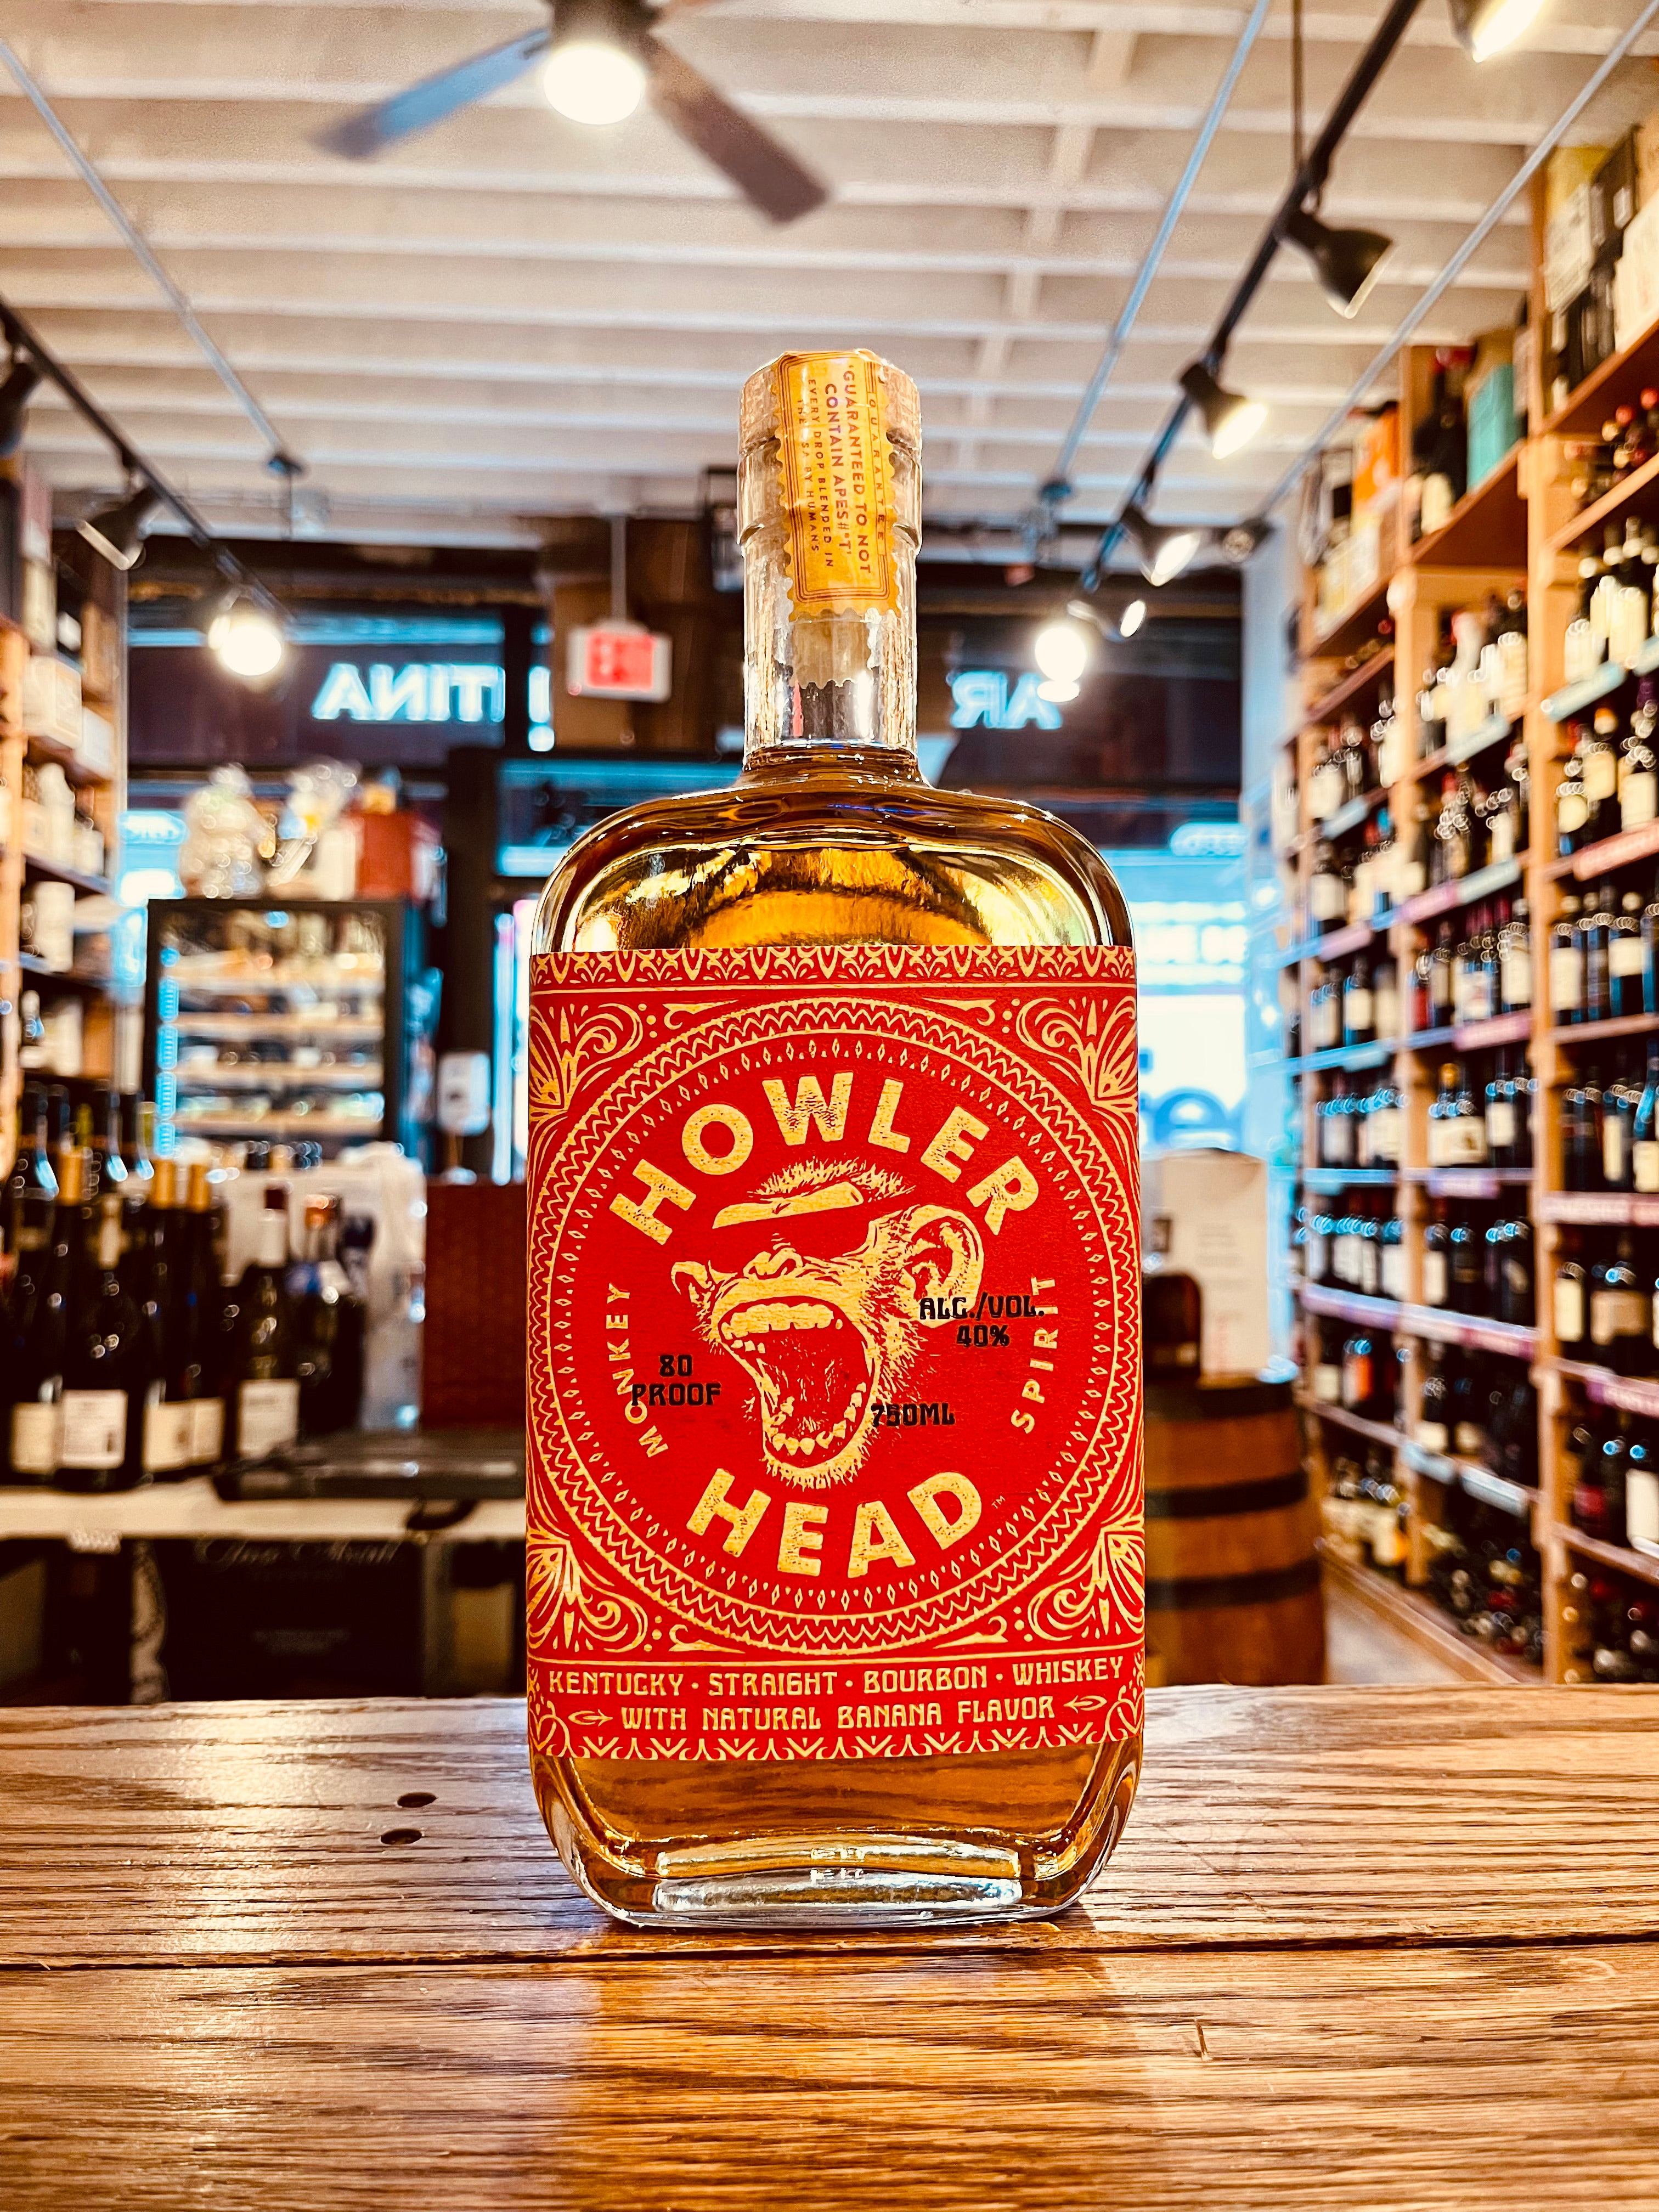 Howler Head 750mL a flat surfaced squared clear glass bottle with a red label and the image of a monkey wearing sunglasses 